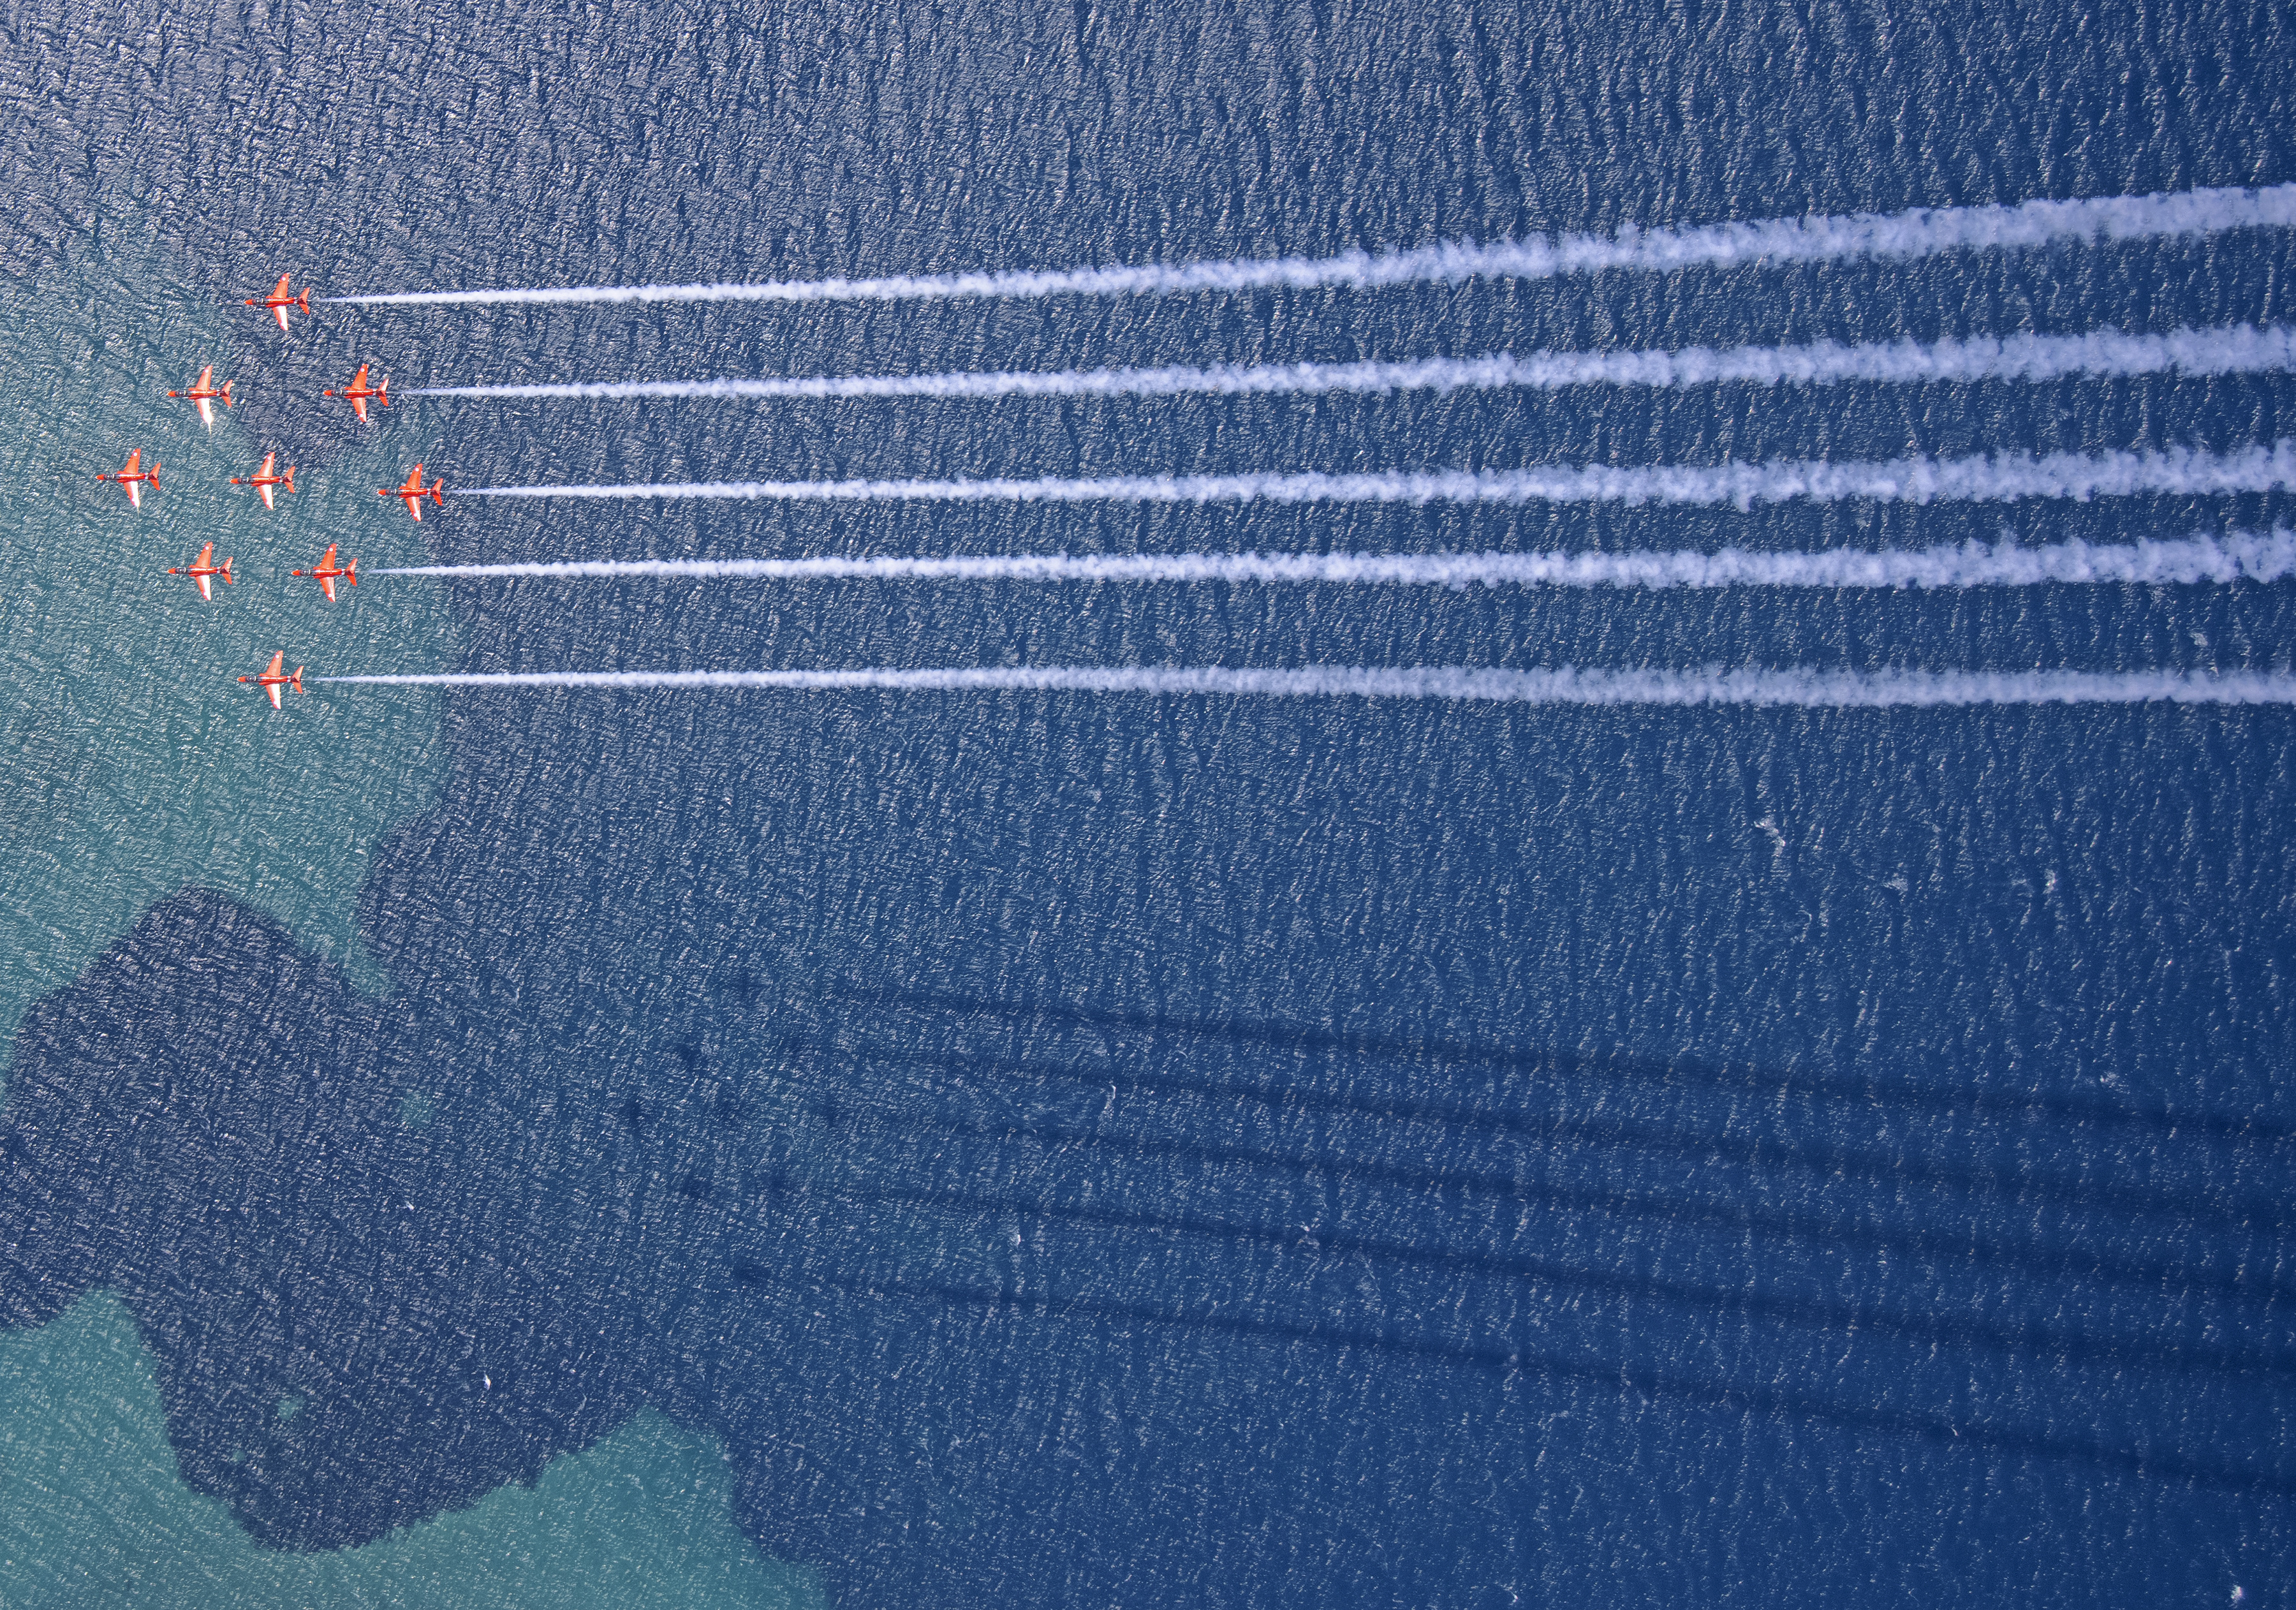 Red Arrows in formation over the water, with smoke trails.